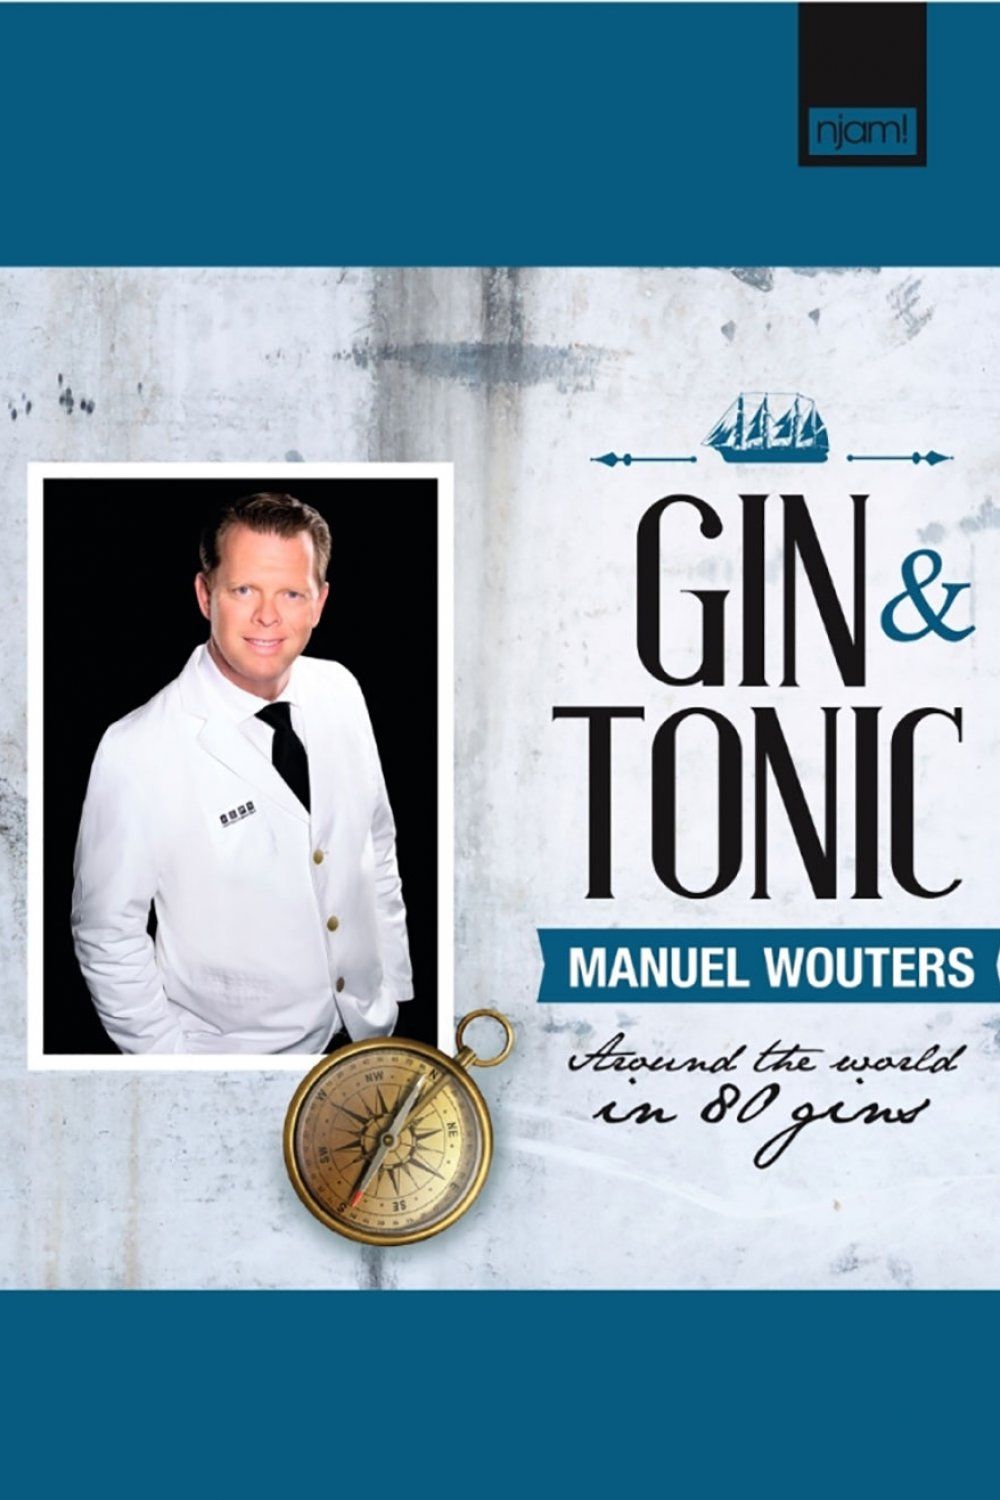 Gin & Tonic, around the world in 80 gins 